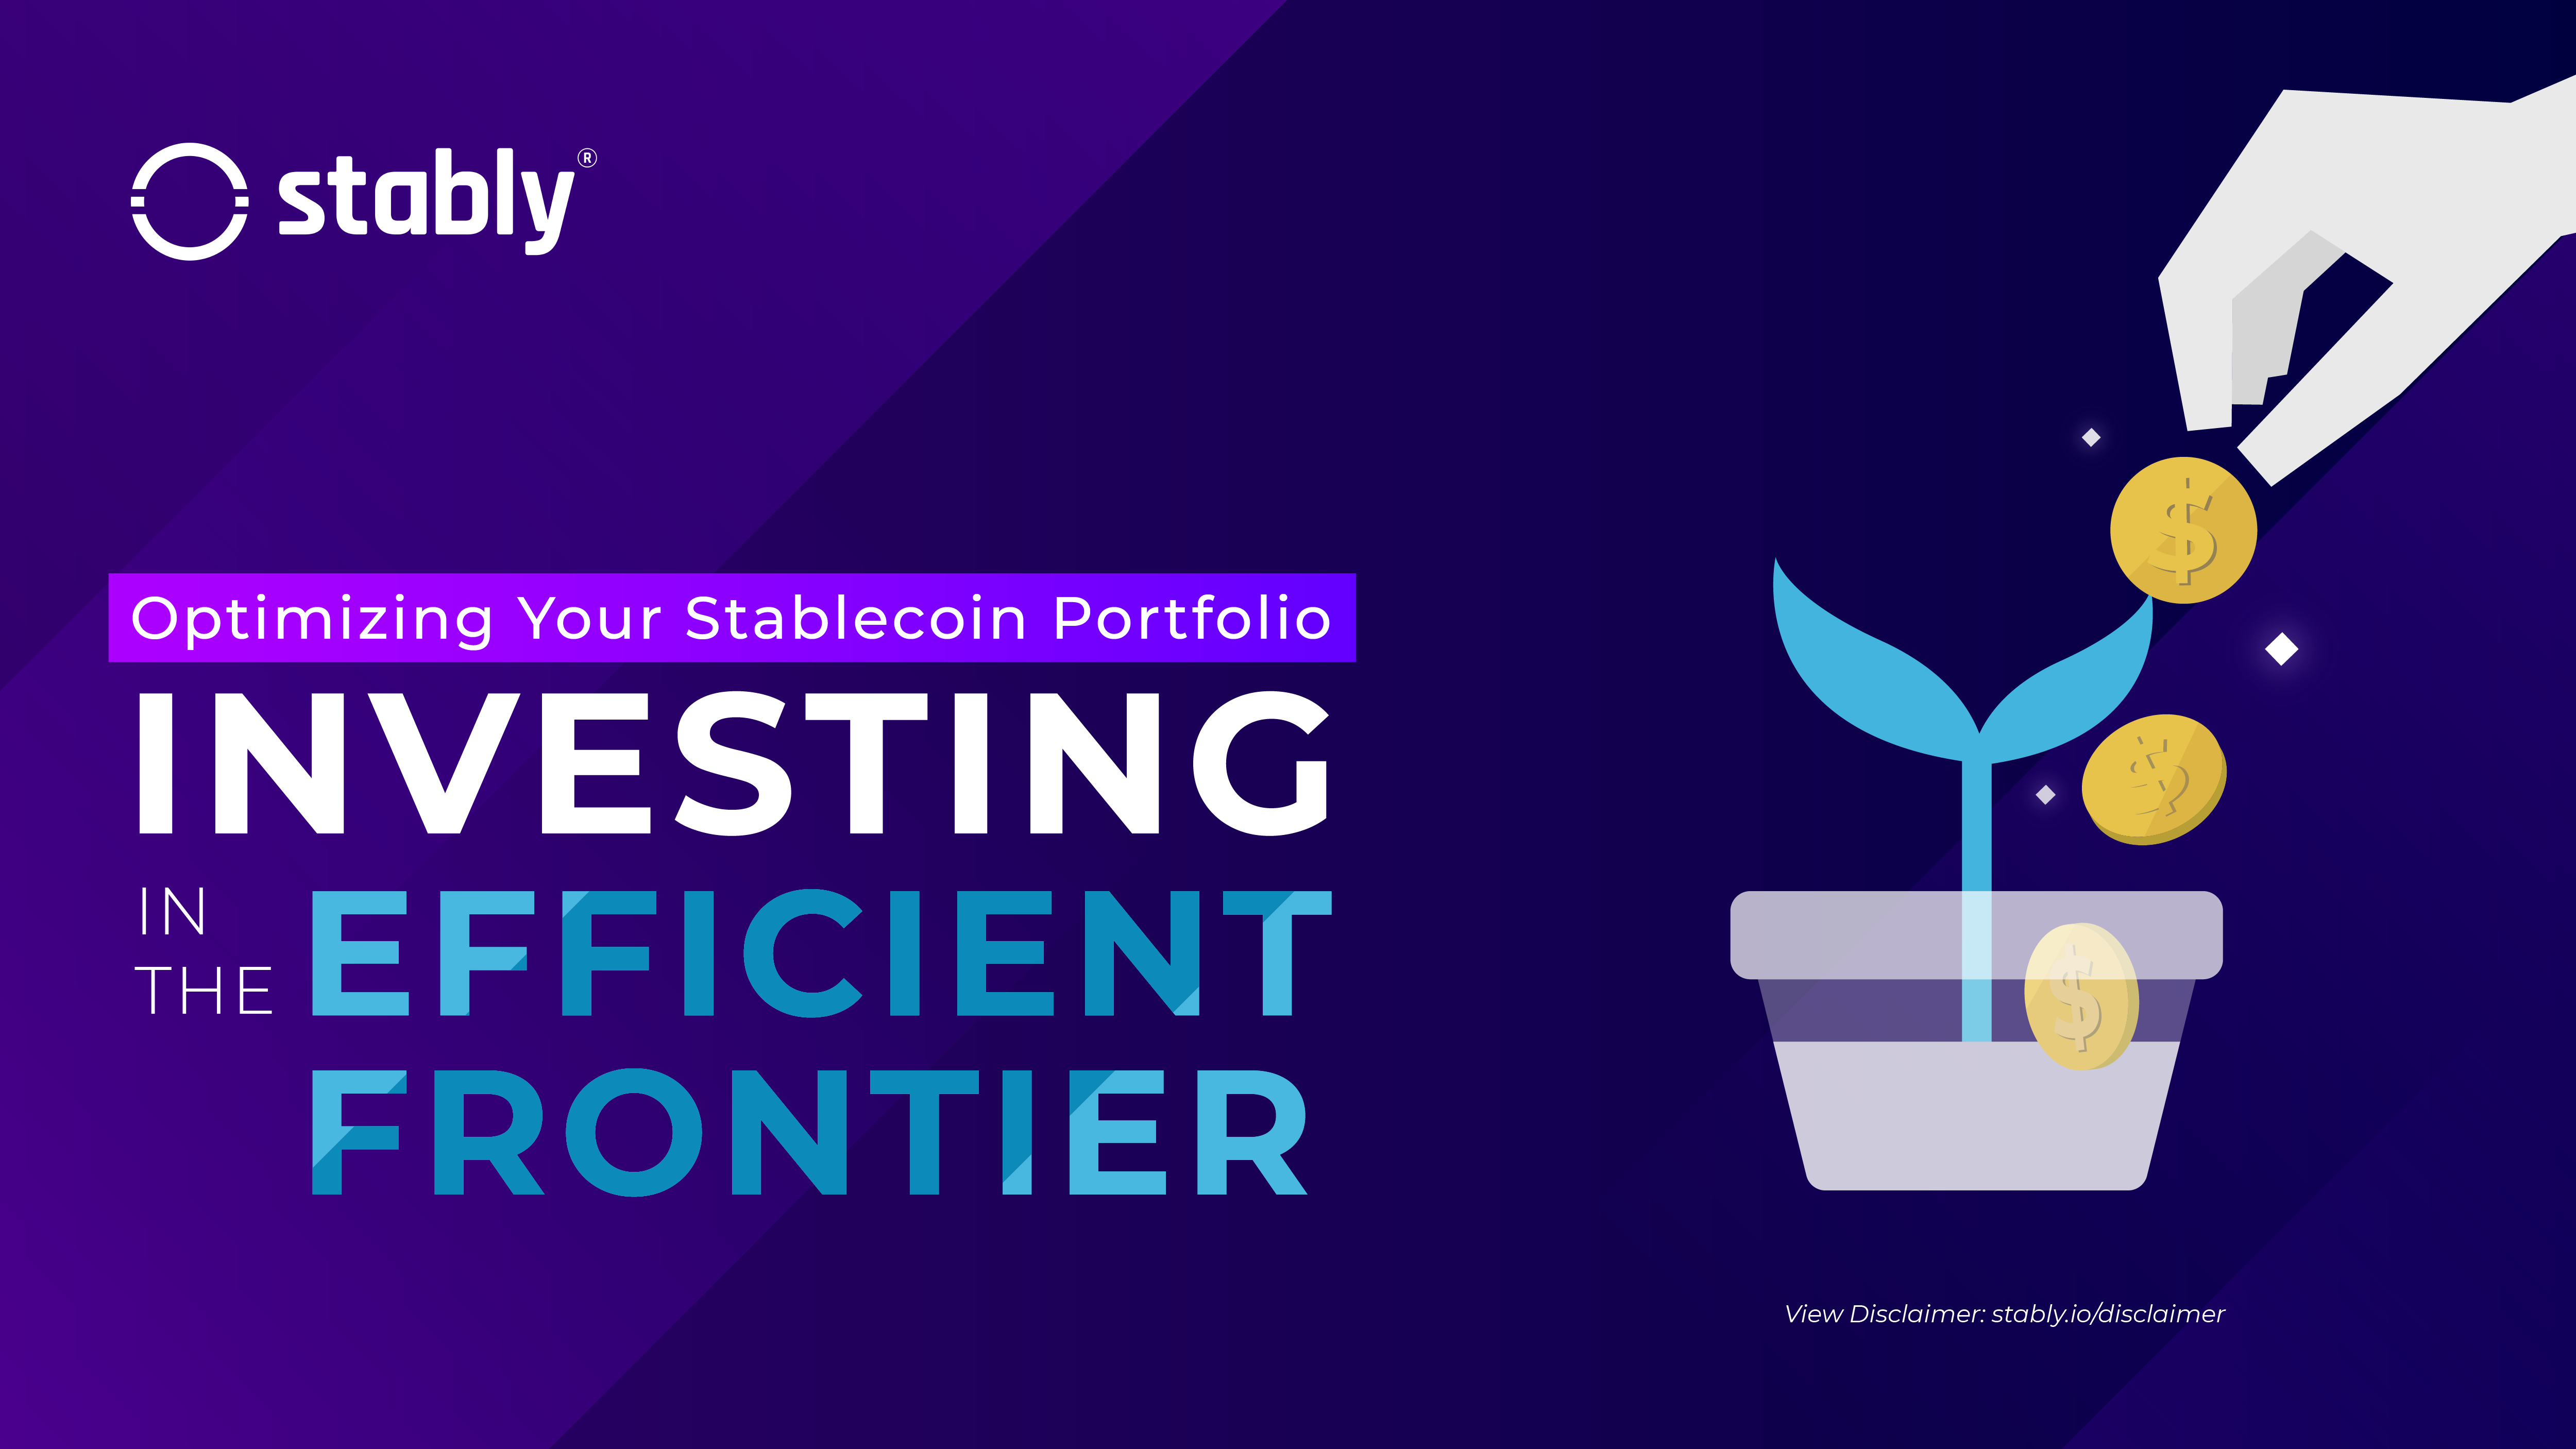 Optimizing Your Stablecoin Portfolio: Investing In The Efficient Frontier